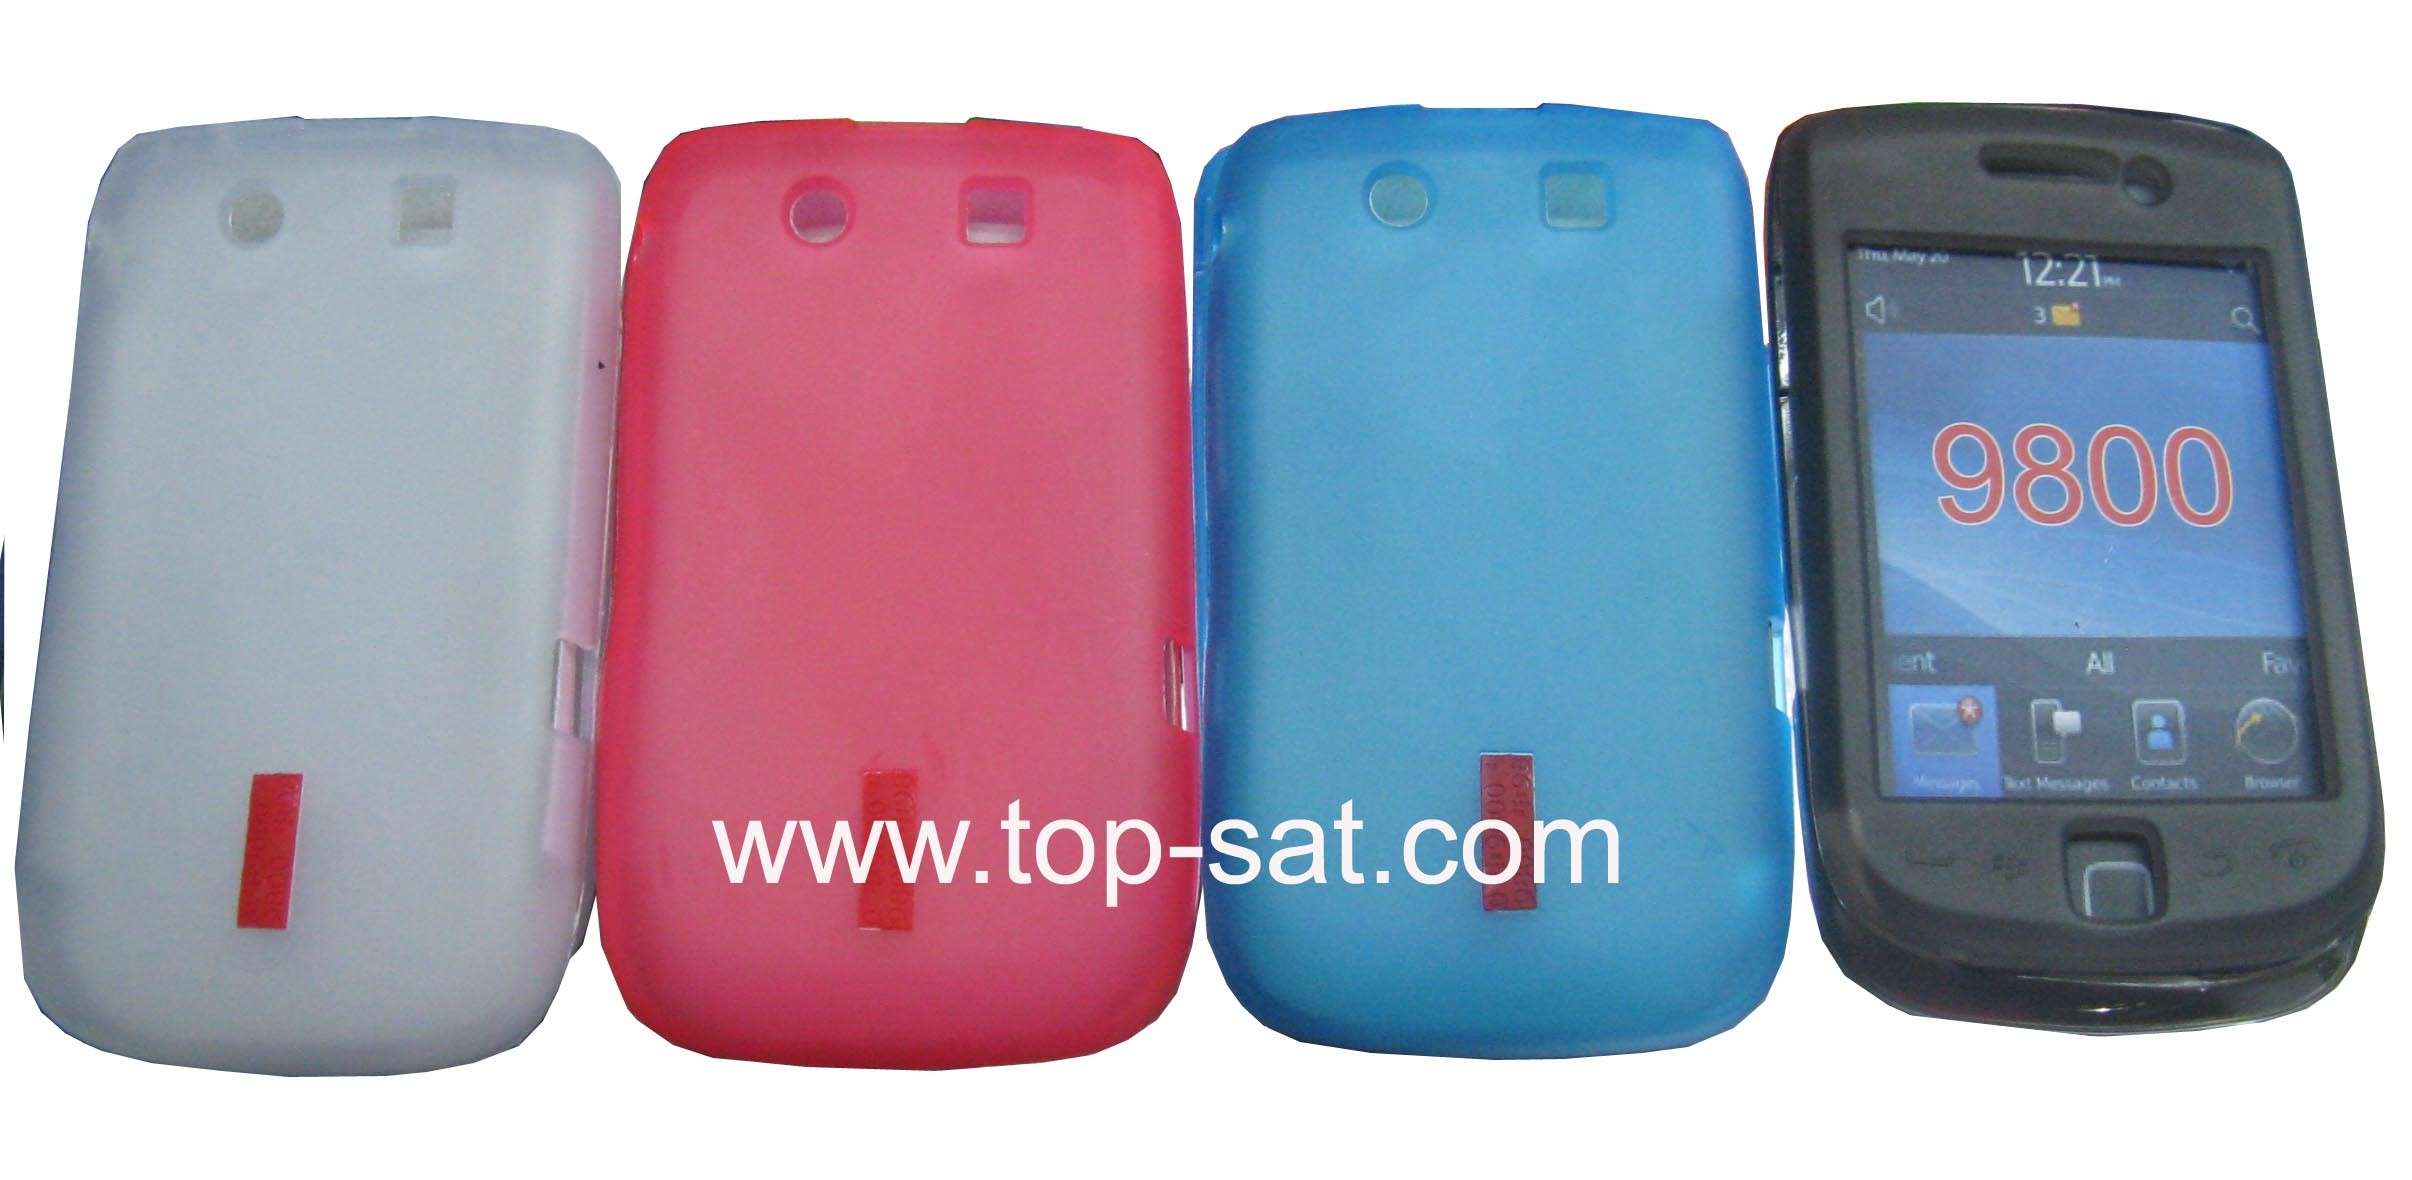 Blackberry Torch 9800 Cases And Covers